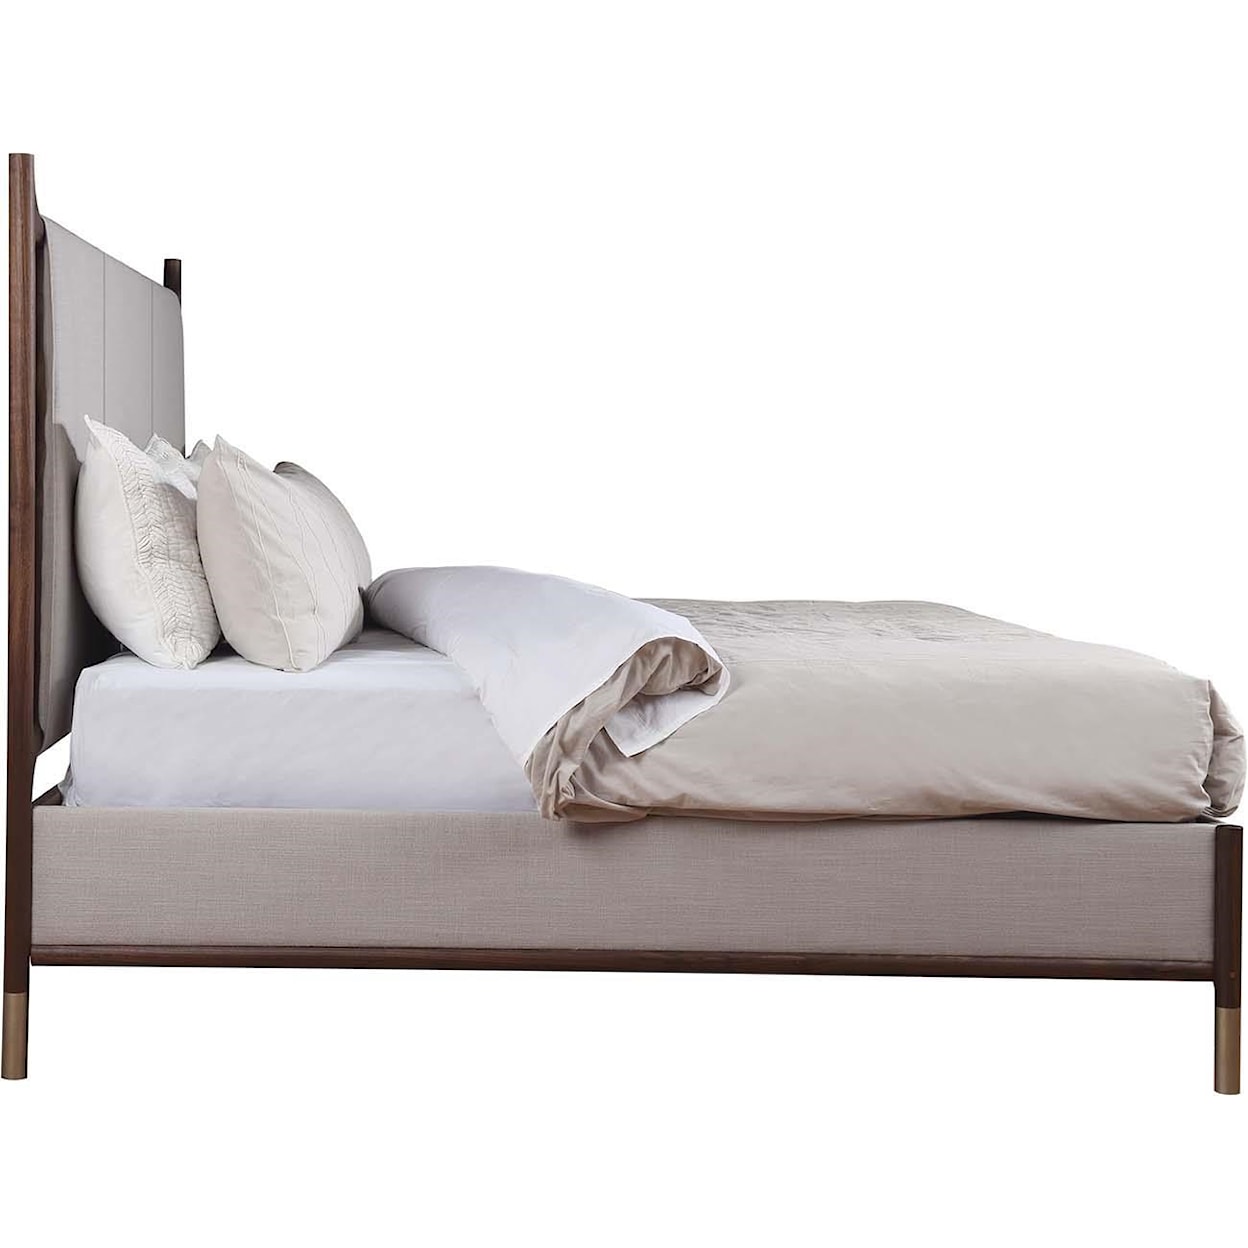 Stickley Walnut Grove Queen Leather Upholstered Bed